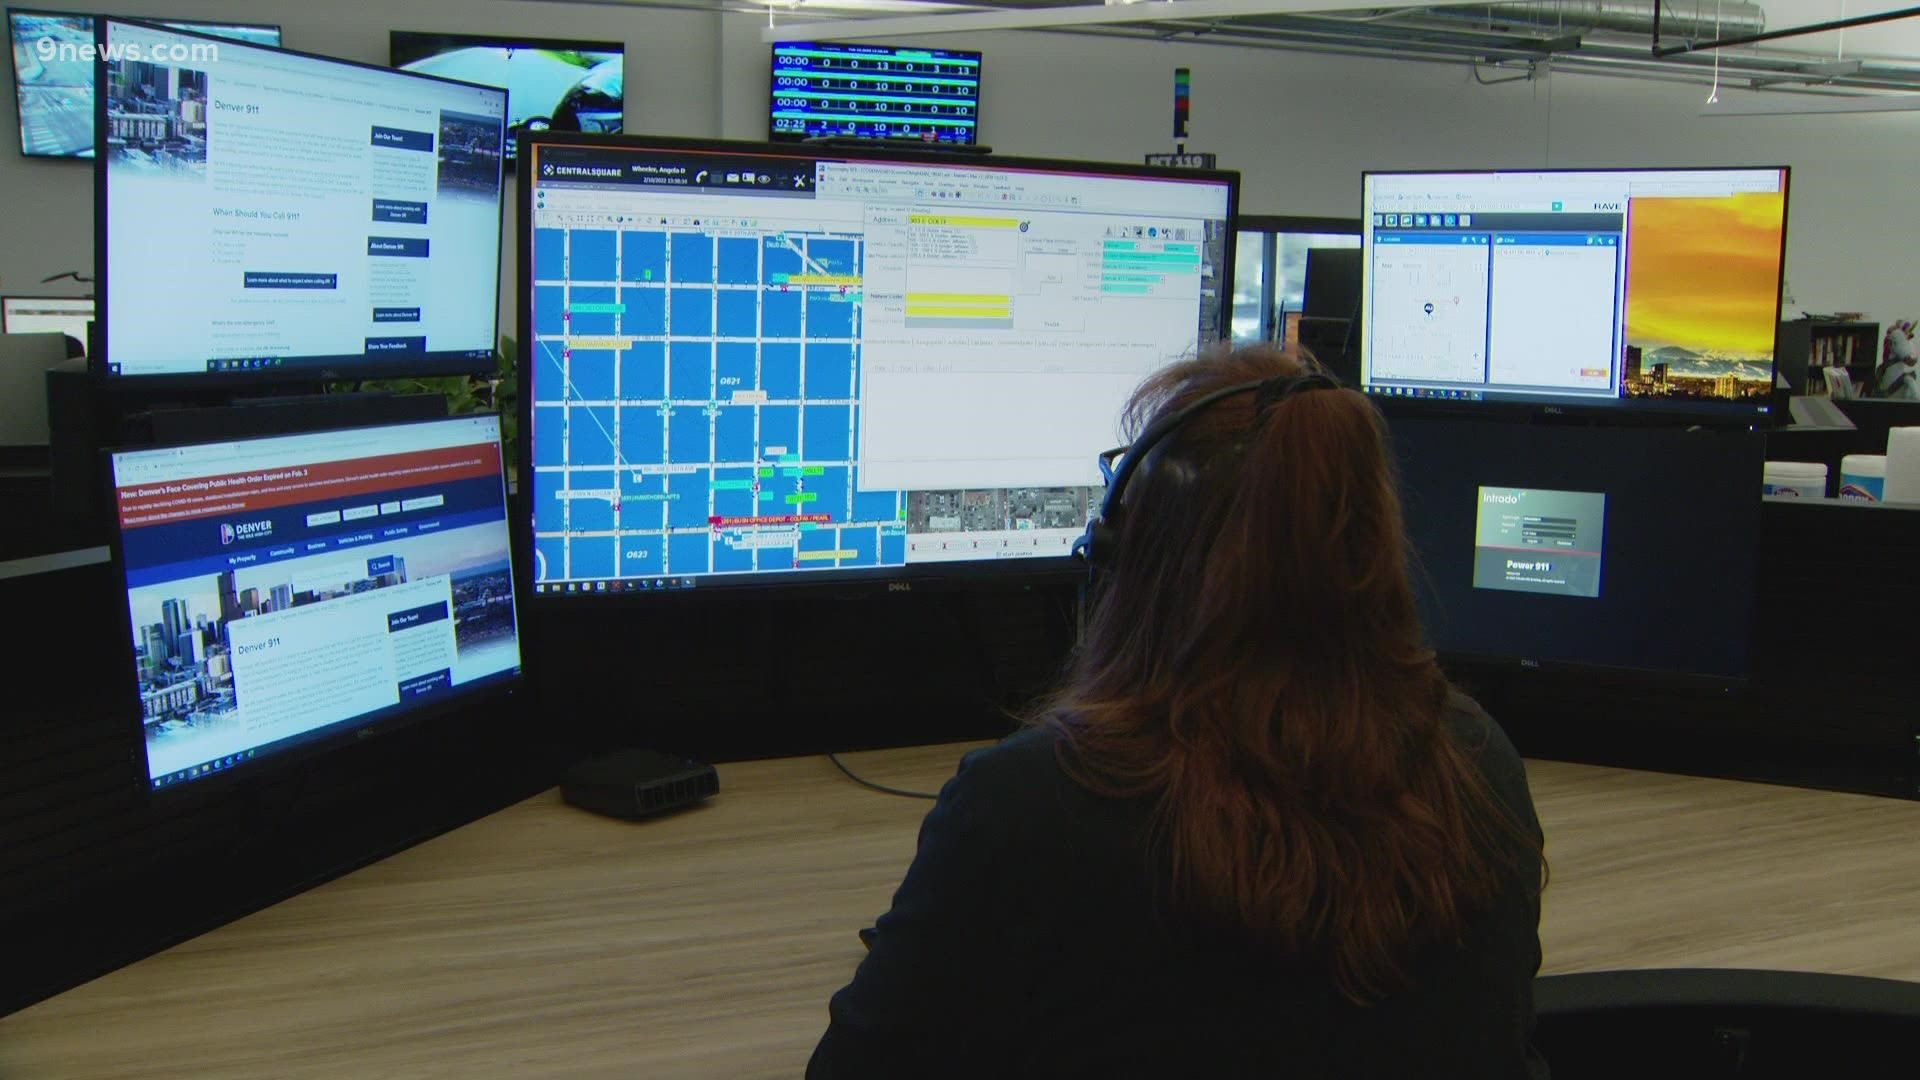 The City of Denver doesn't have enough people to answer 911 calls, for reasons including callers becoming increasingly nasty on the phone with them.